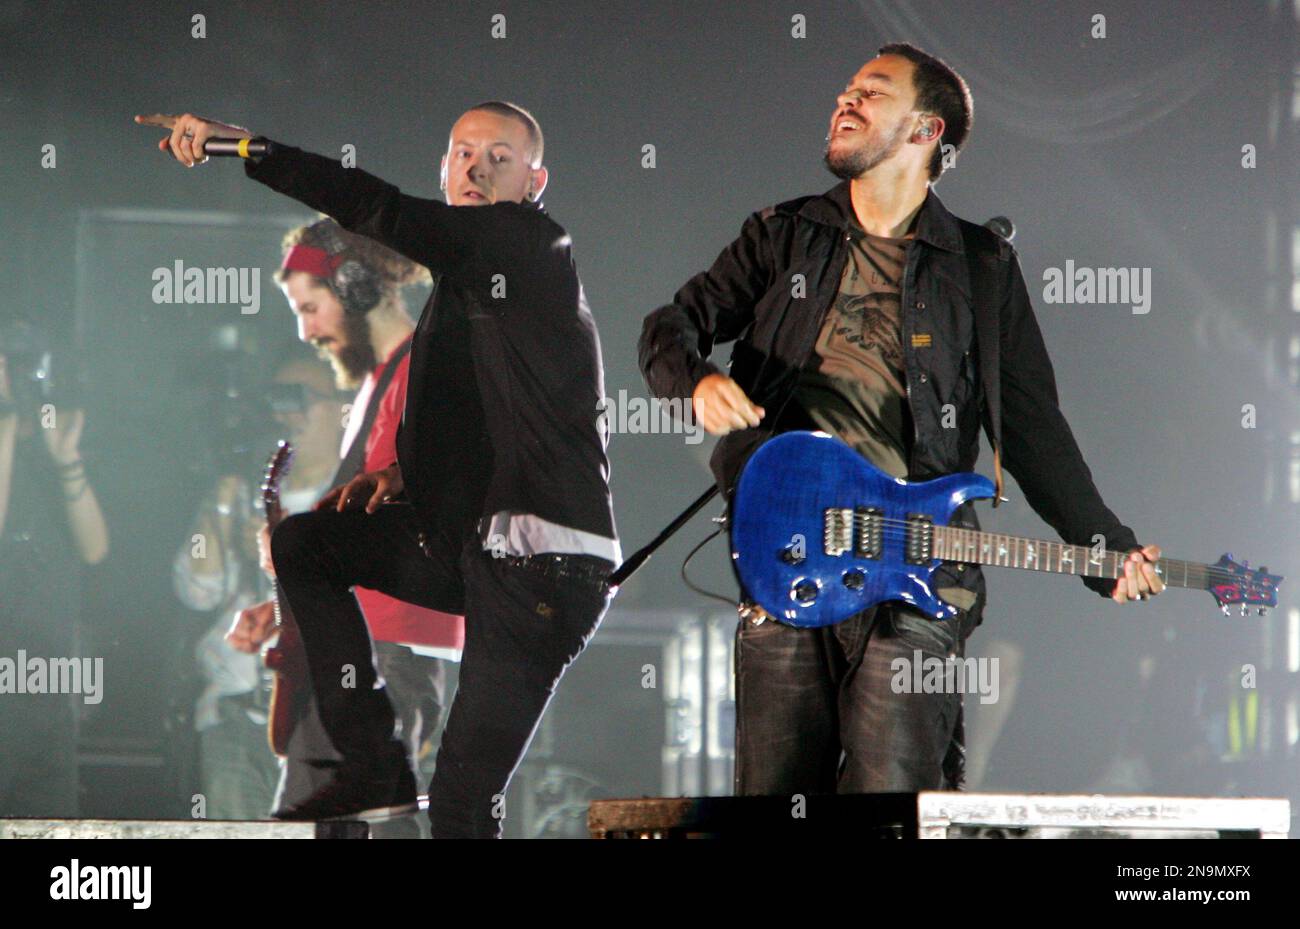 Grammy Awards winner Linkin Park performs during the Live Earth concert in  Makuhari, near Tokyo, Saturday, July 7, 2007 as part of the 24-hour global  concert series to raise awareness about climate change. (AP Photo/Koji  Sasahara Stock Photo - Alamy